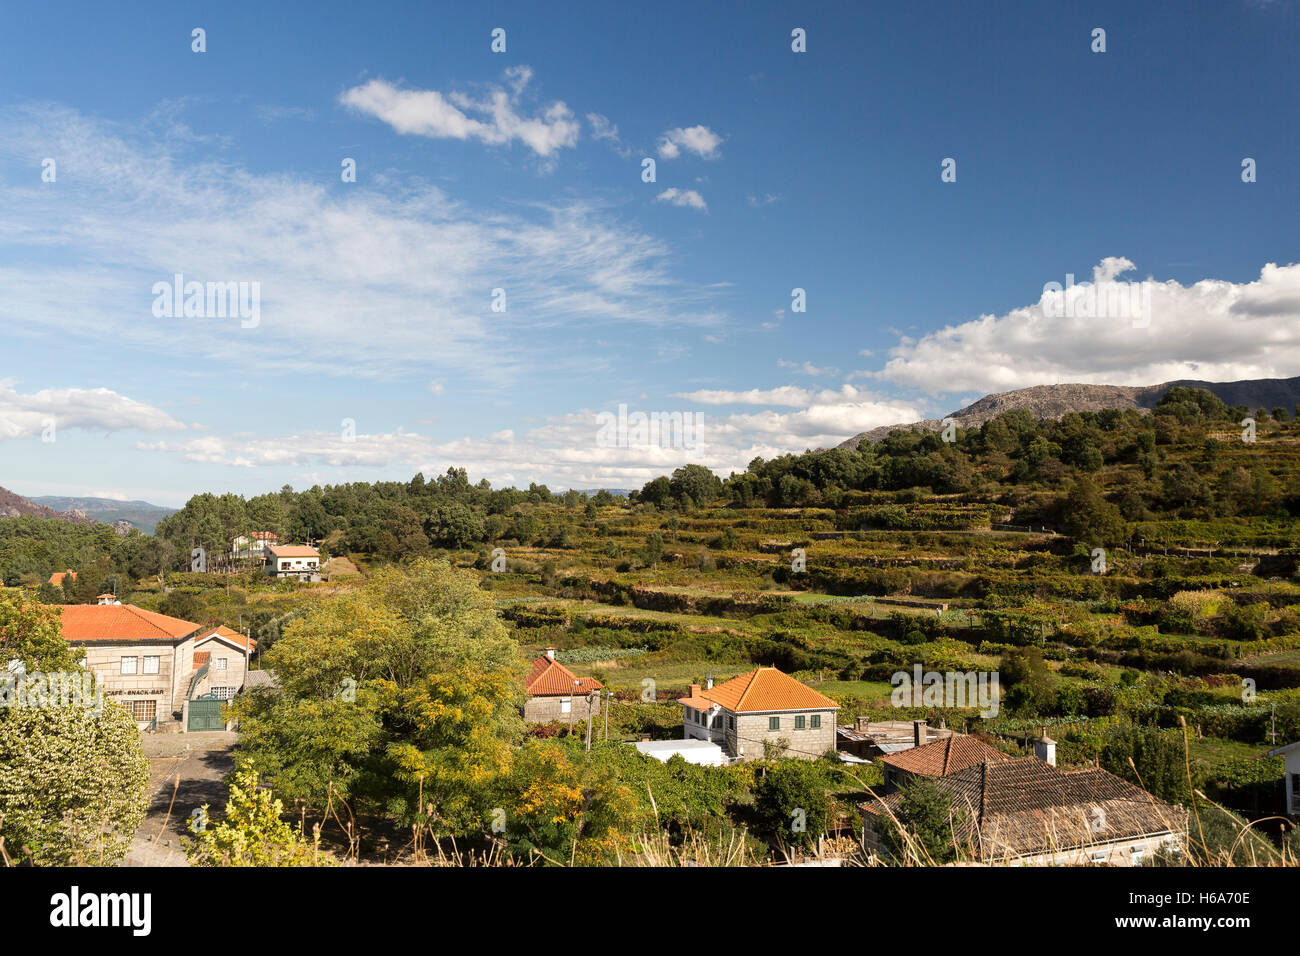 View of the village of Lindoso near the Alto Lindoso Dam on the Lima River, Portugal Stock Photo